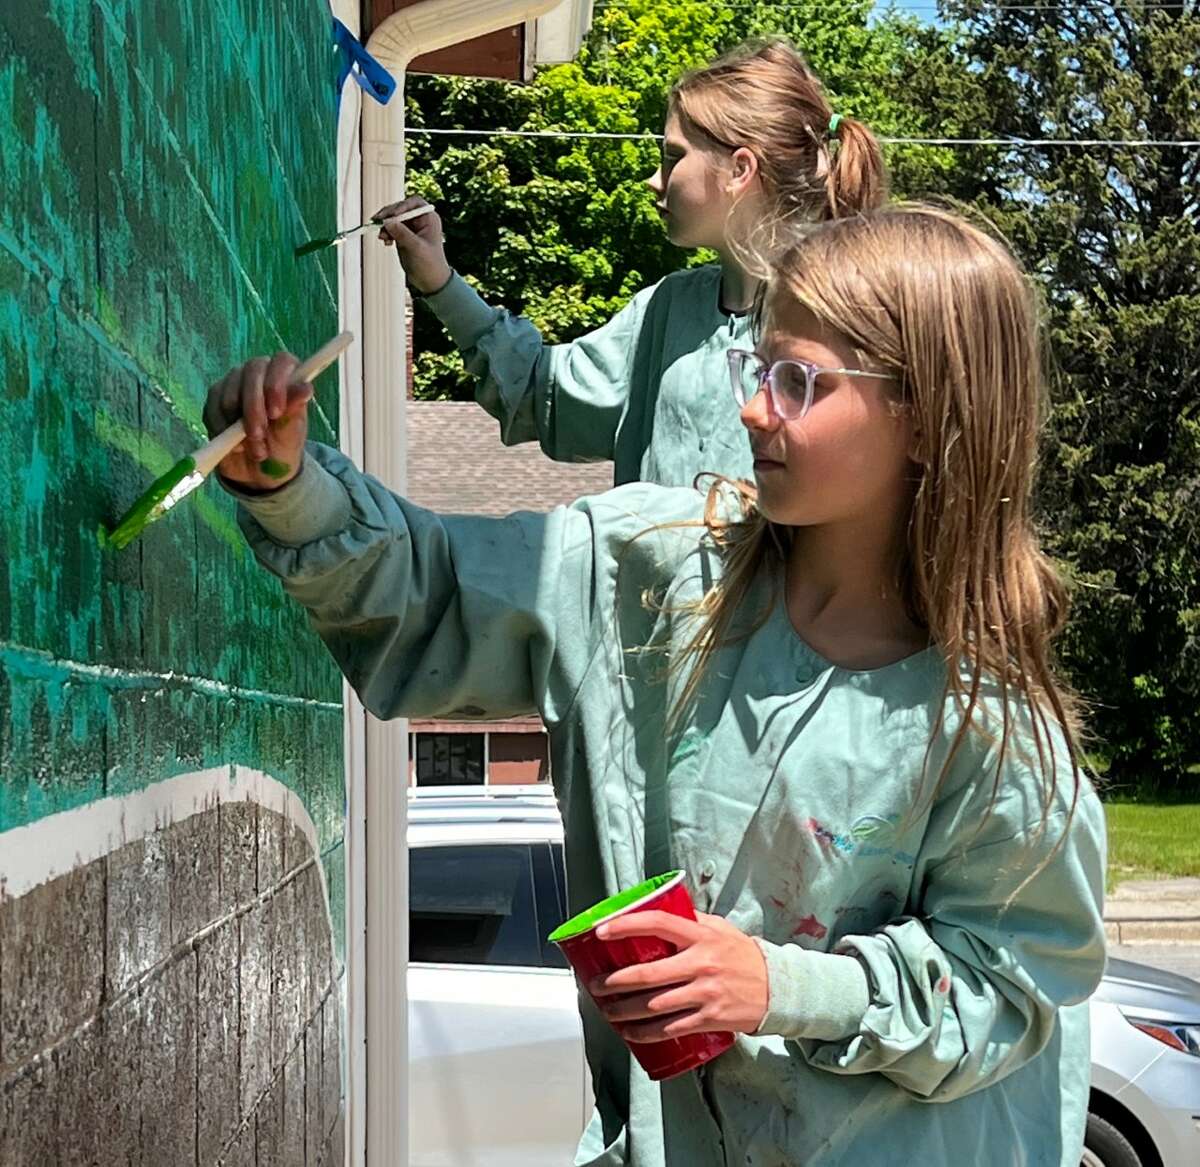 Hazel Sedelmaier (front) and Dannika Berensten paint a section of the mural at the Farr Center in Onekama.